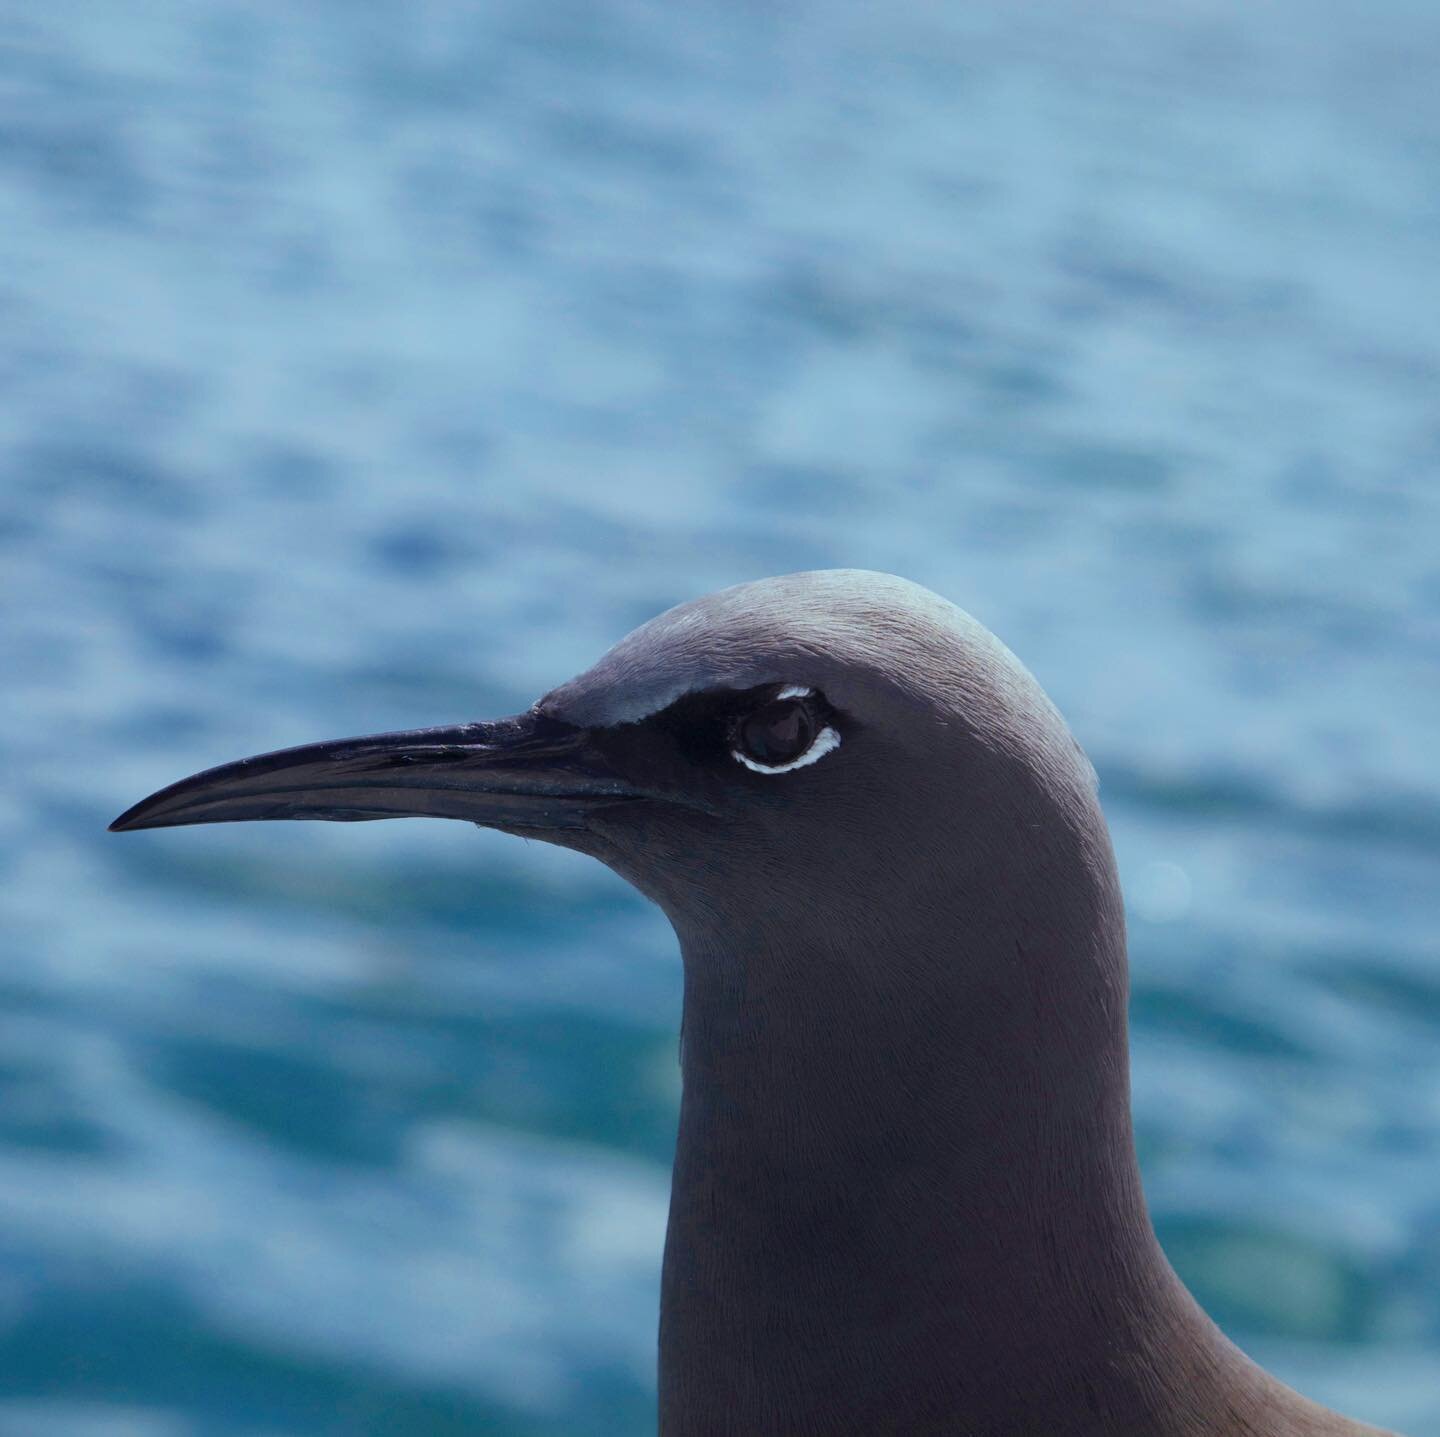 The Lava Gull is known for its distinctive white upper and lower eyelids against a uniformly dark grey body.  It is one of the rarest gulls on earth, yet frequently seen throughout the islands. 
#galapagos #wildlife #birdlife #wildlifephotography #bi